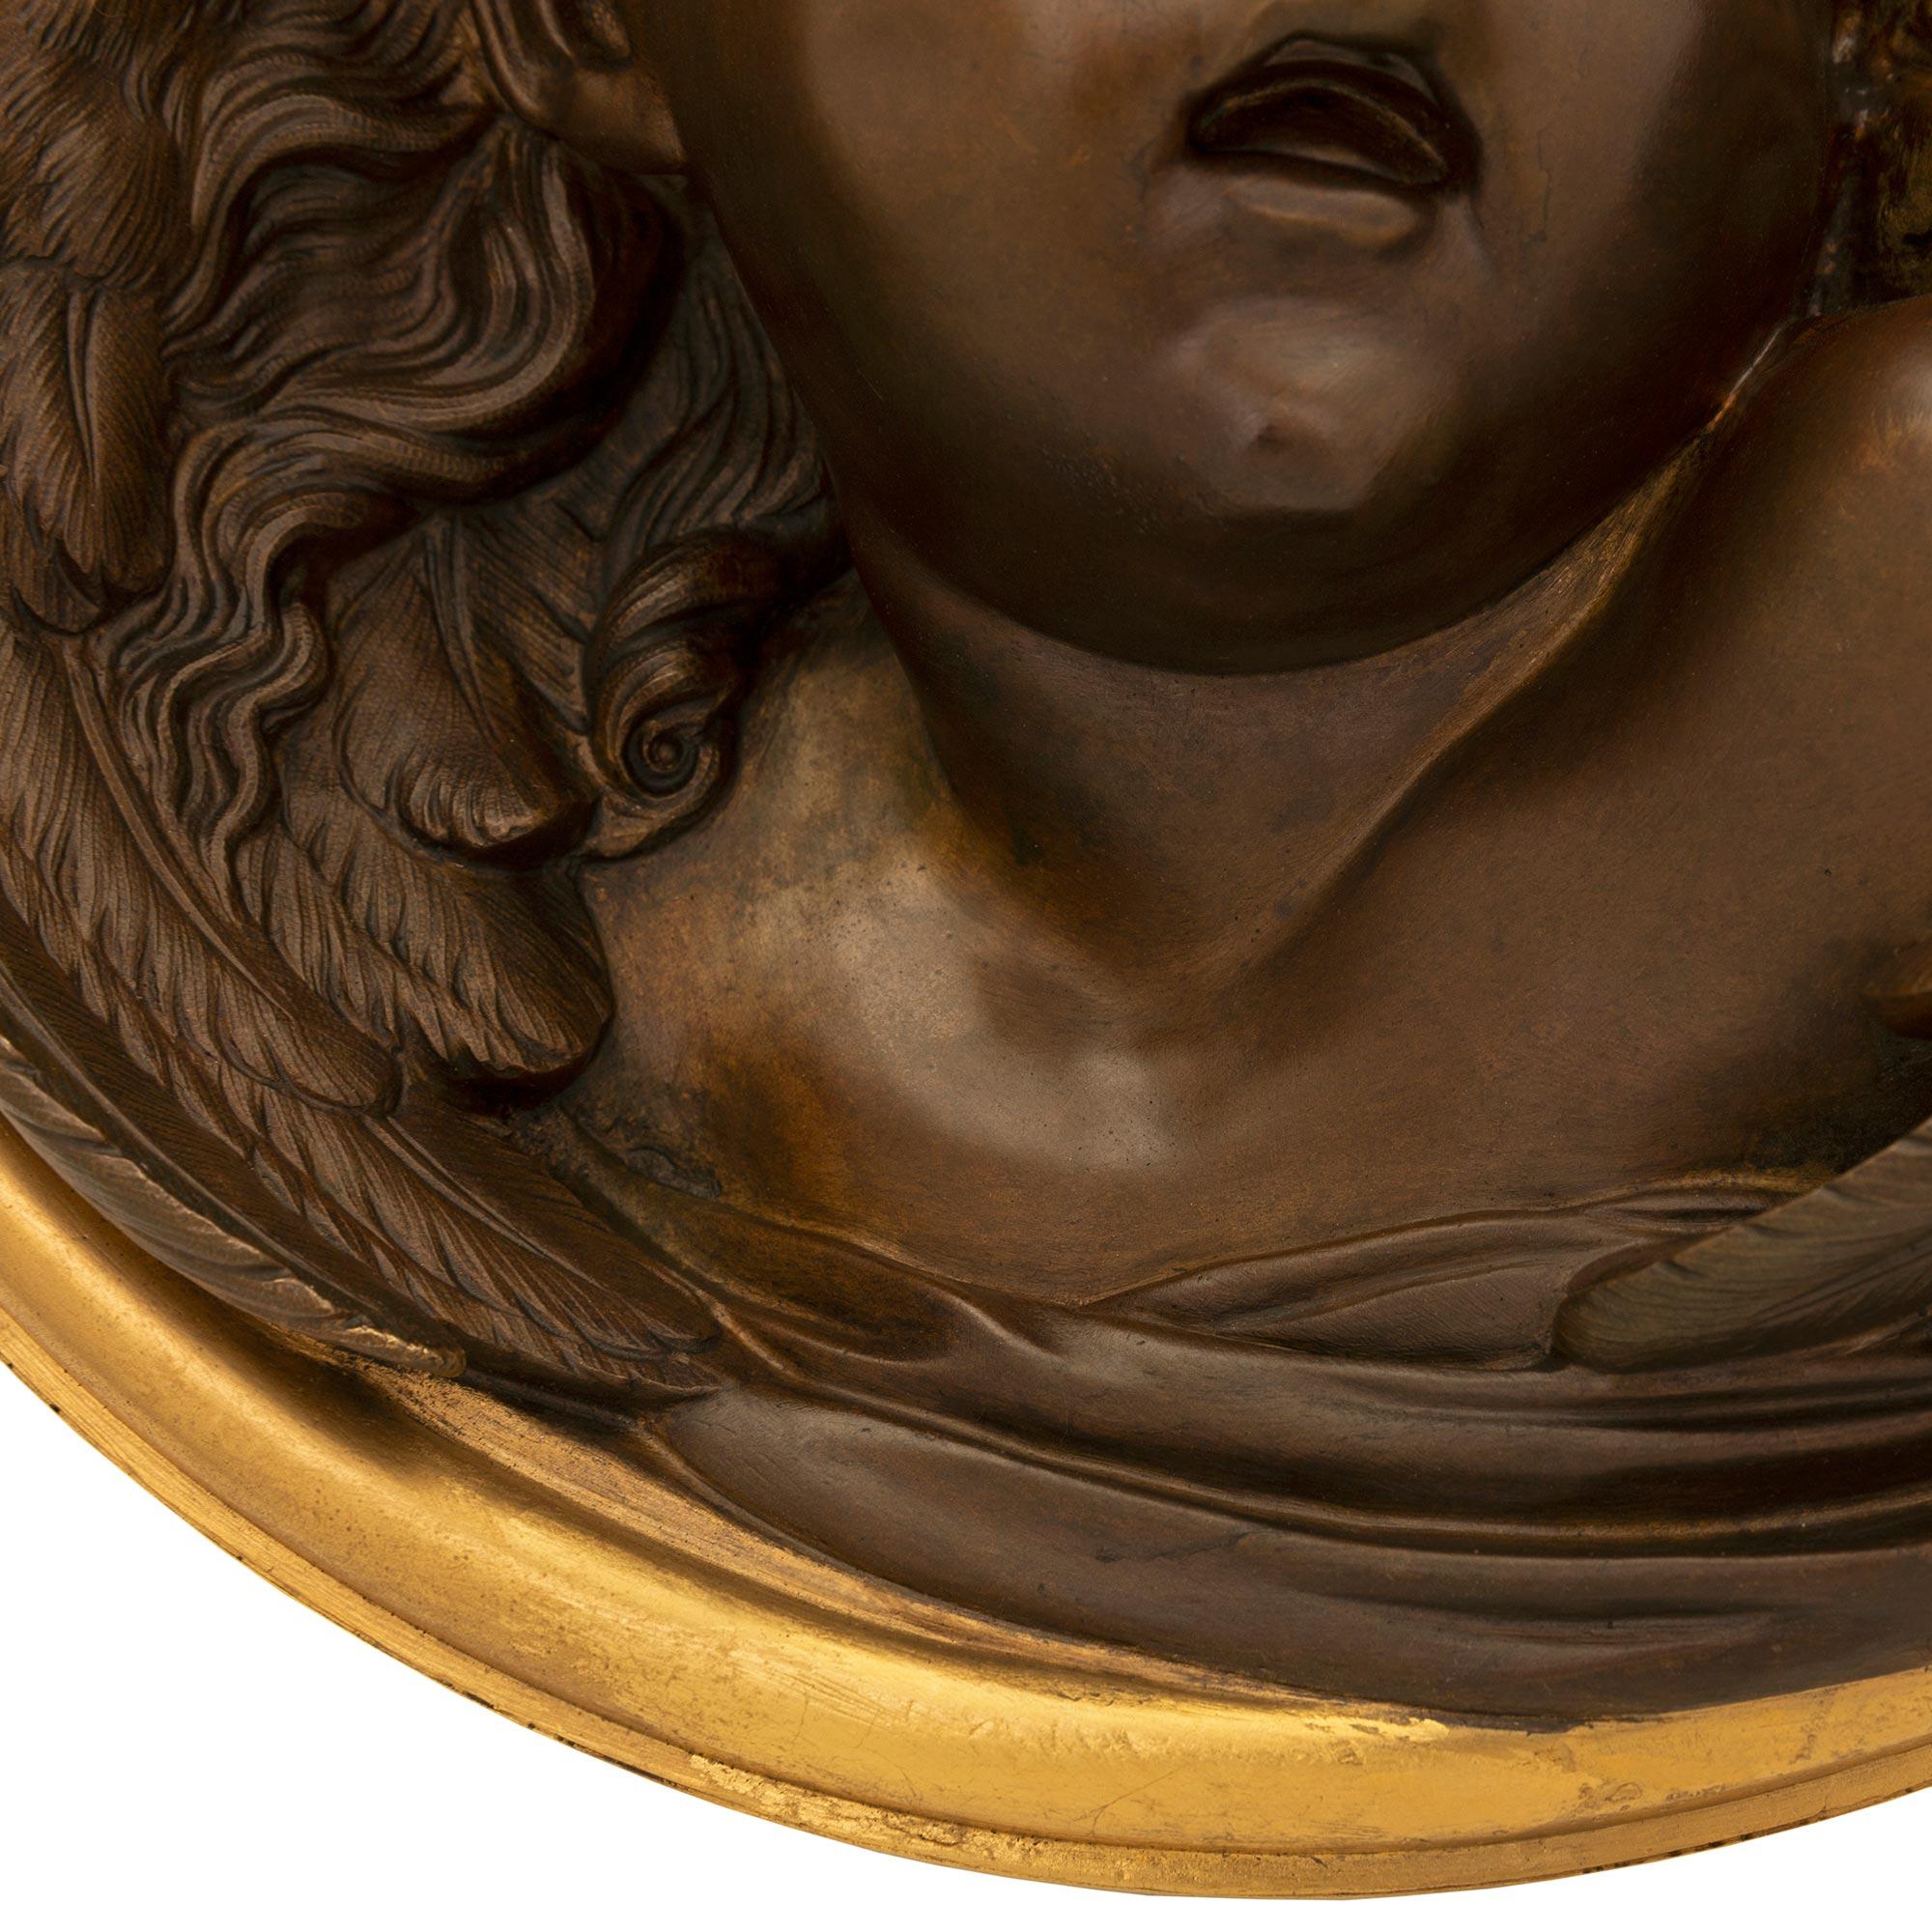 French 19th Century Belle Époque Period Patinated Bronze and Ormolu Wall Plaque For Sale 1